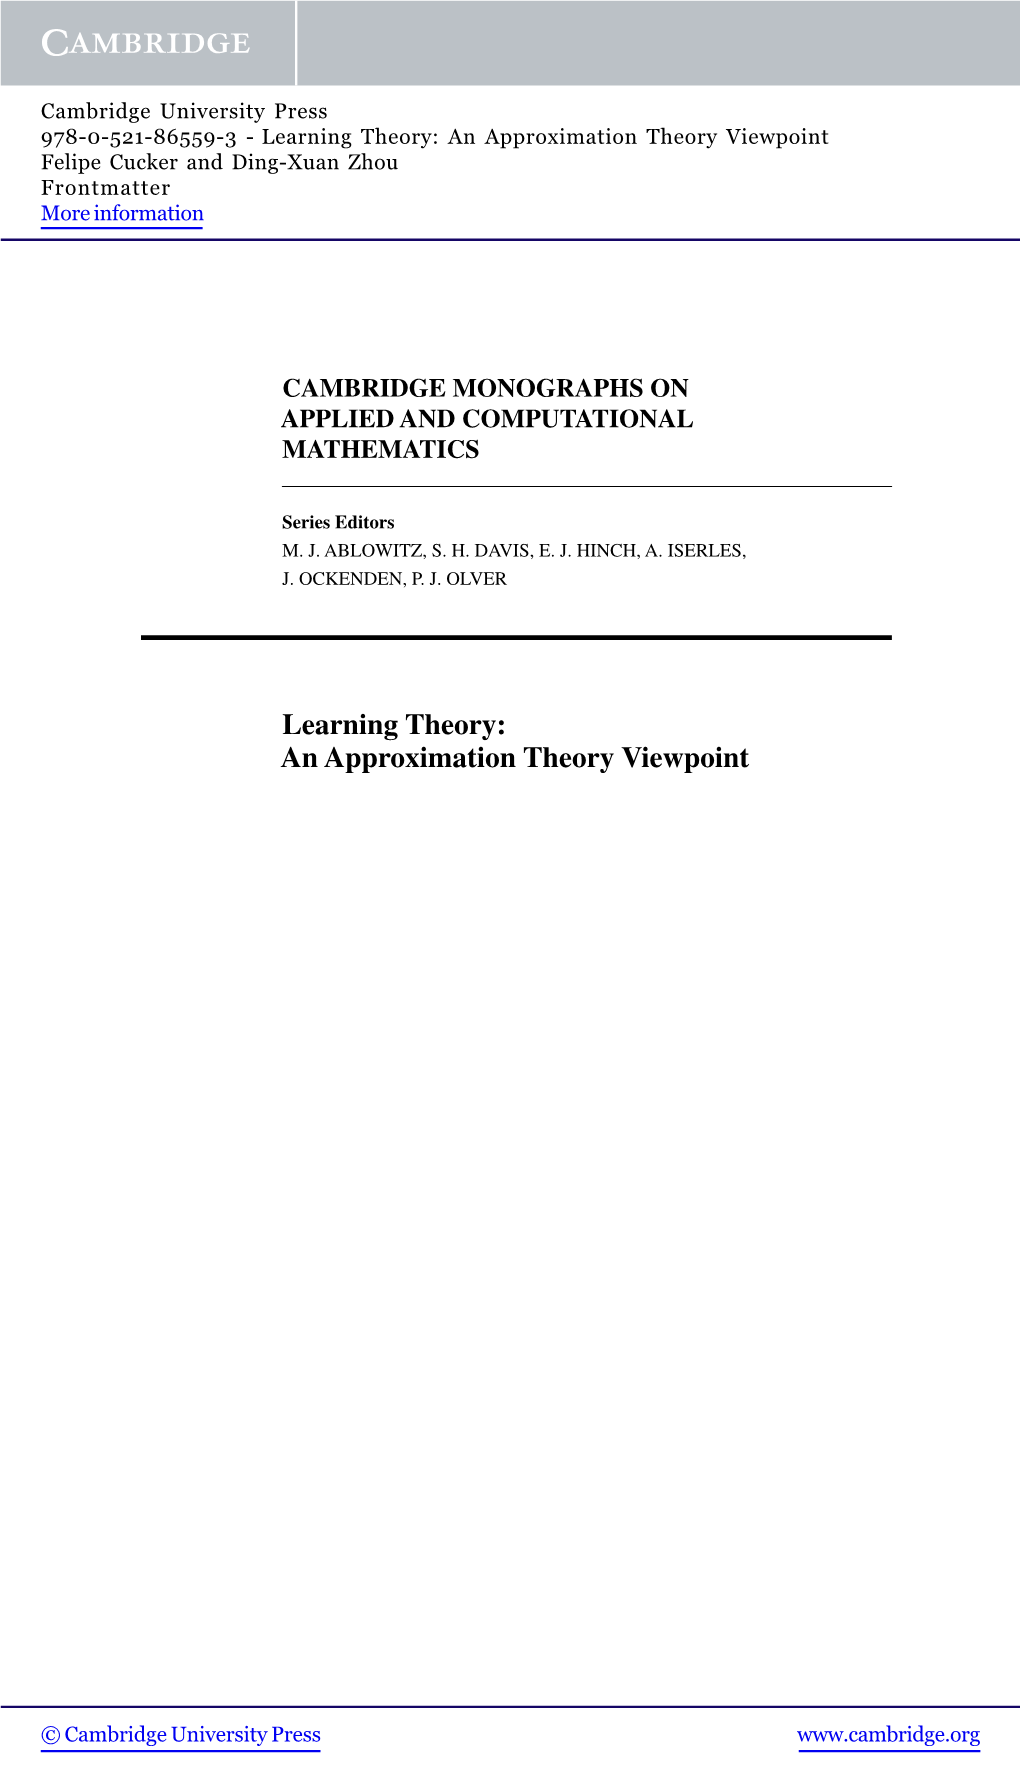 Learning Theory: an Approximation Theory Viewpoint Felipe Cucker and Ding-Xuan Zhou Frontmatter More Information